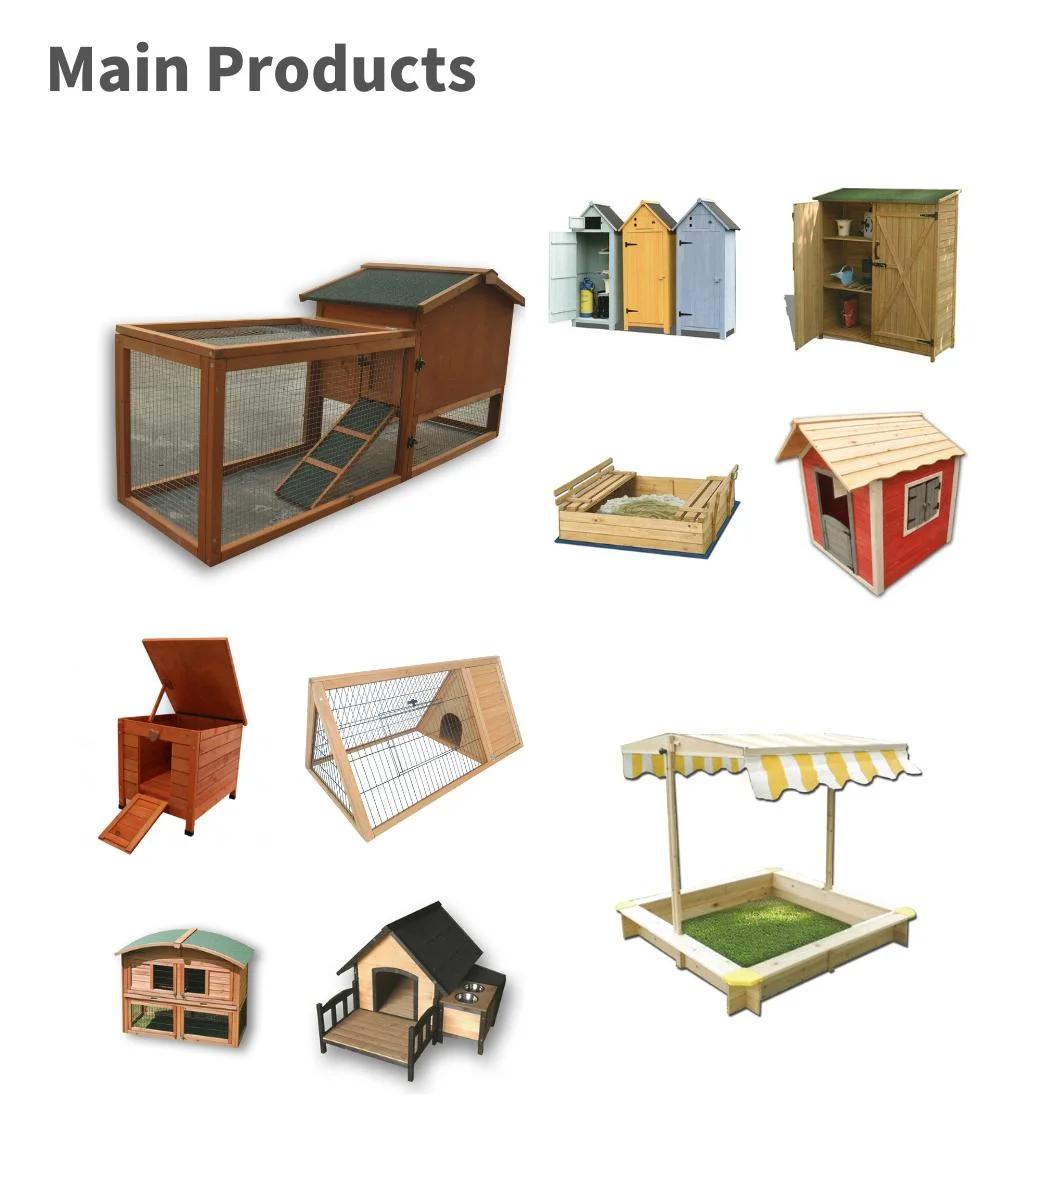 Wooden Sand Box Kids Playground Outdoor Wood Sandpit with Cheap Price